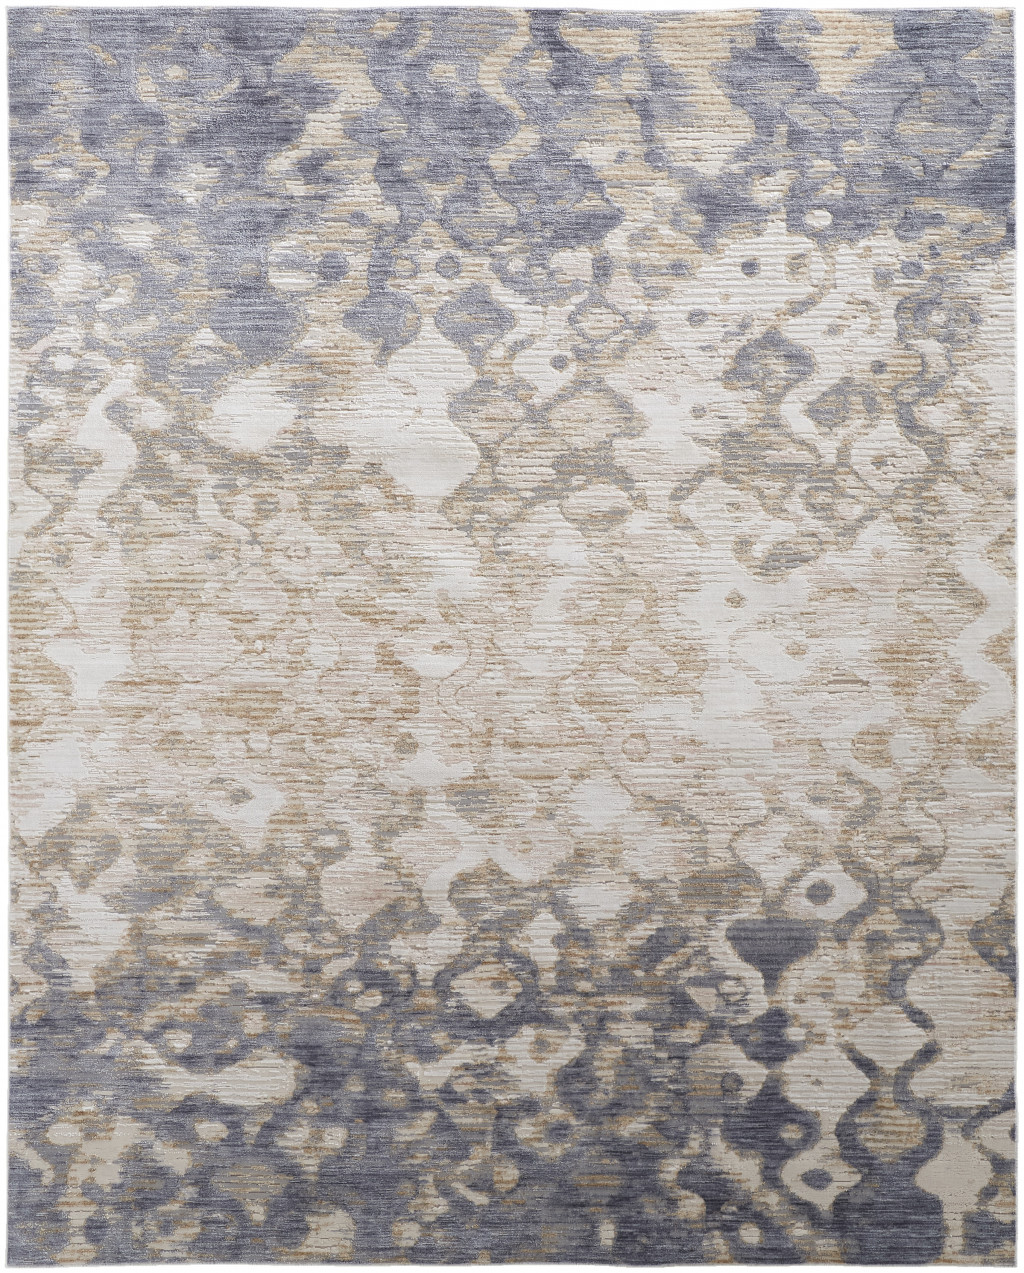 2' X 3' Tan Ivory And Blue Abstract Power Loom Distressed Area Rug-514166-1